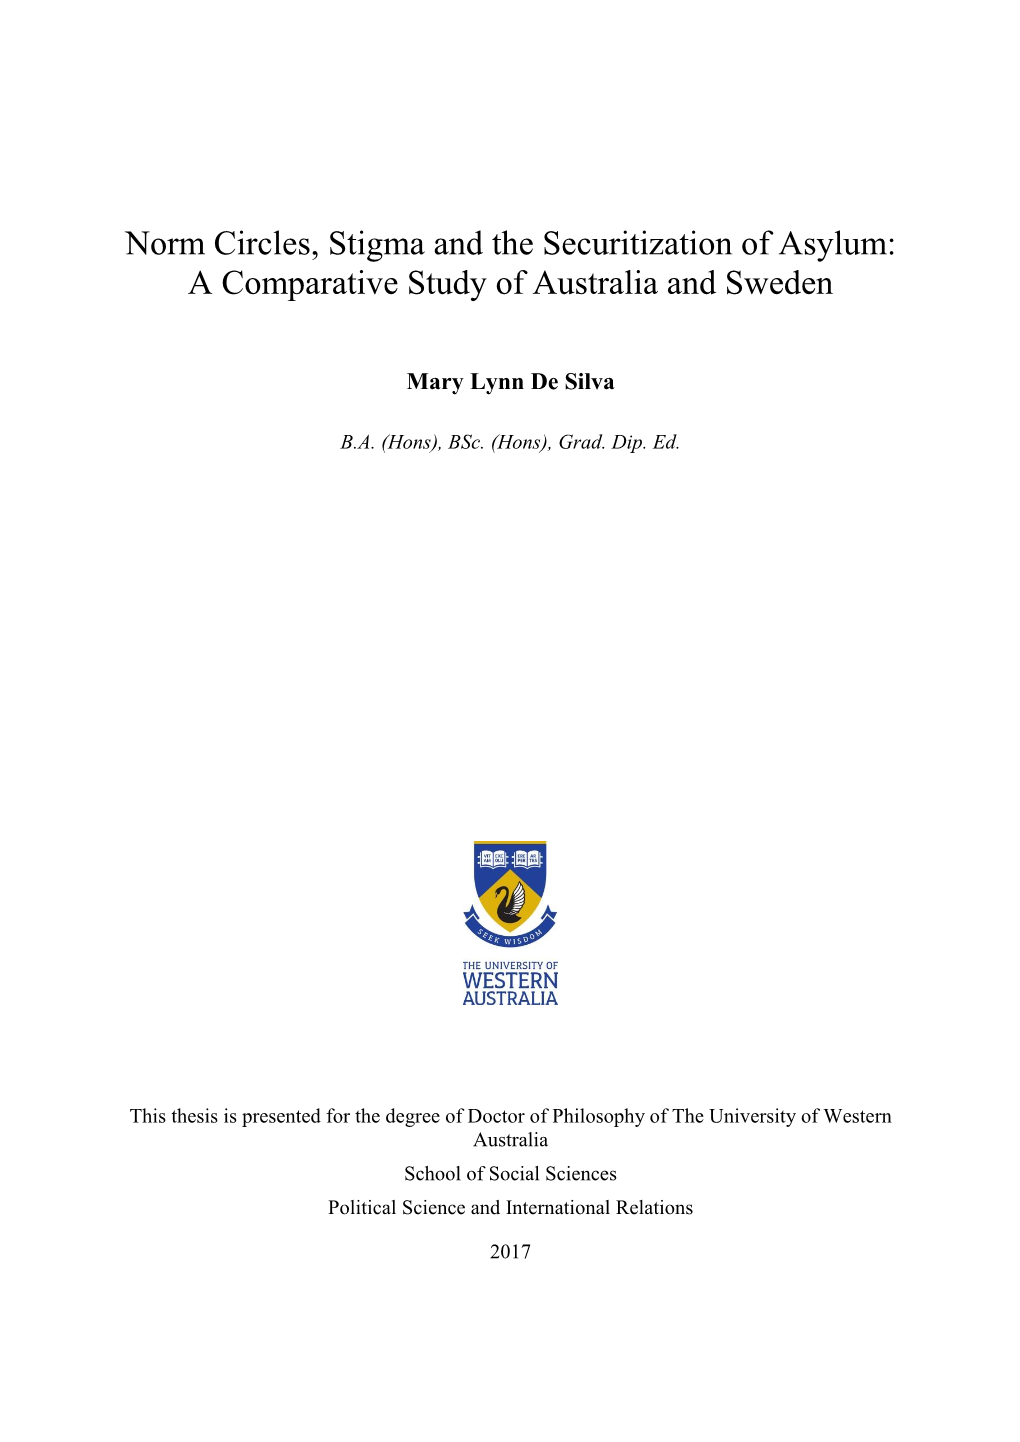 Norm Circles, Stigma and the Securitization of Asylum: a Comparative Study of Australia and Sweden